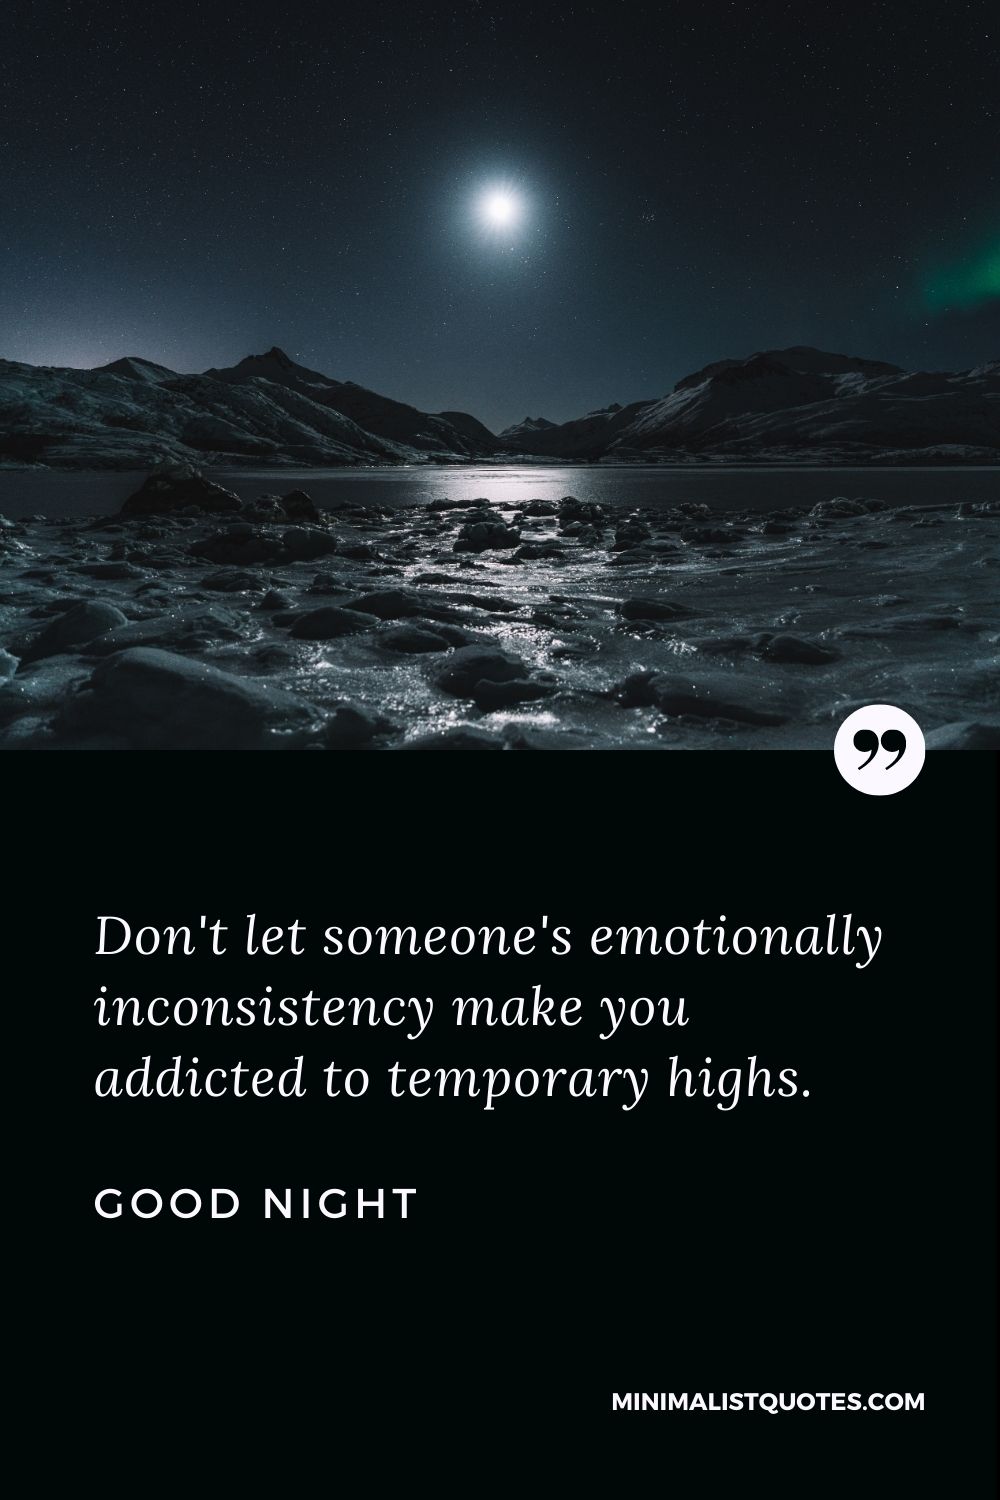 Good Night Wishes - Don't let someone's emotionally inconsistency make you addicted to temporary highs.